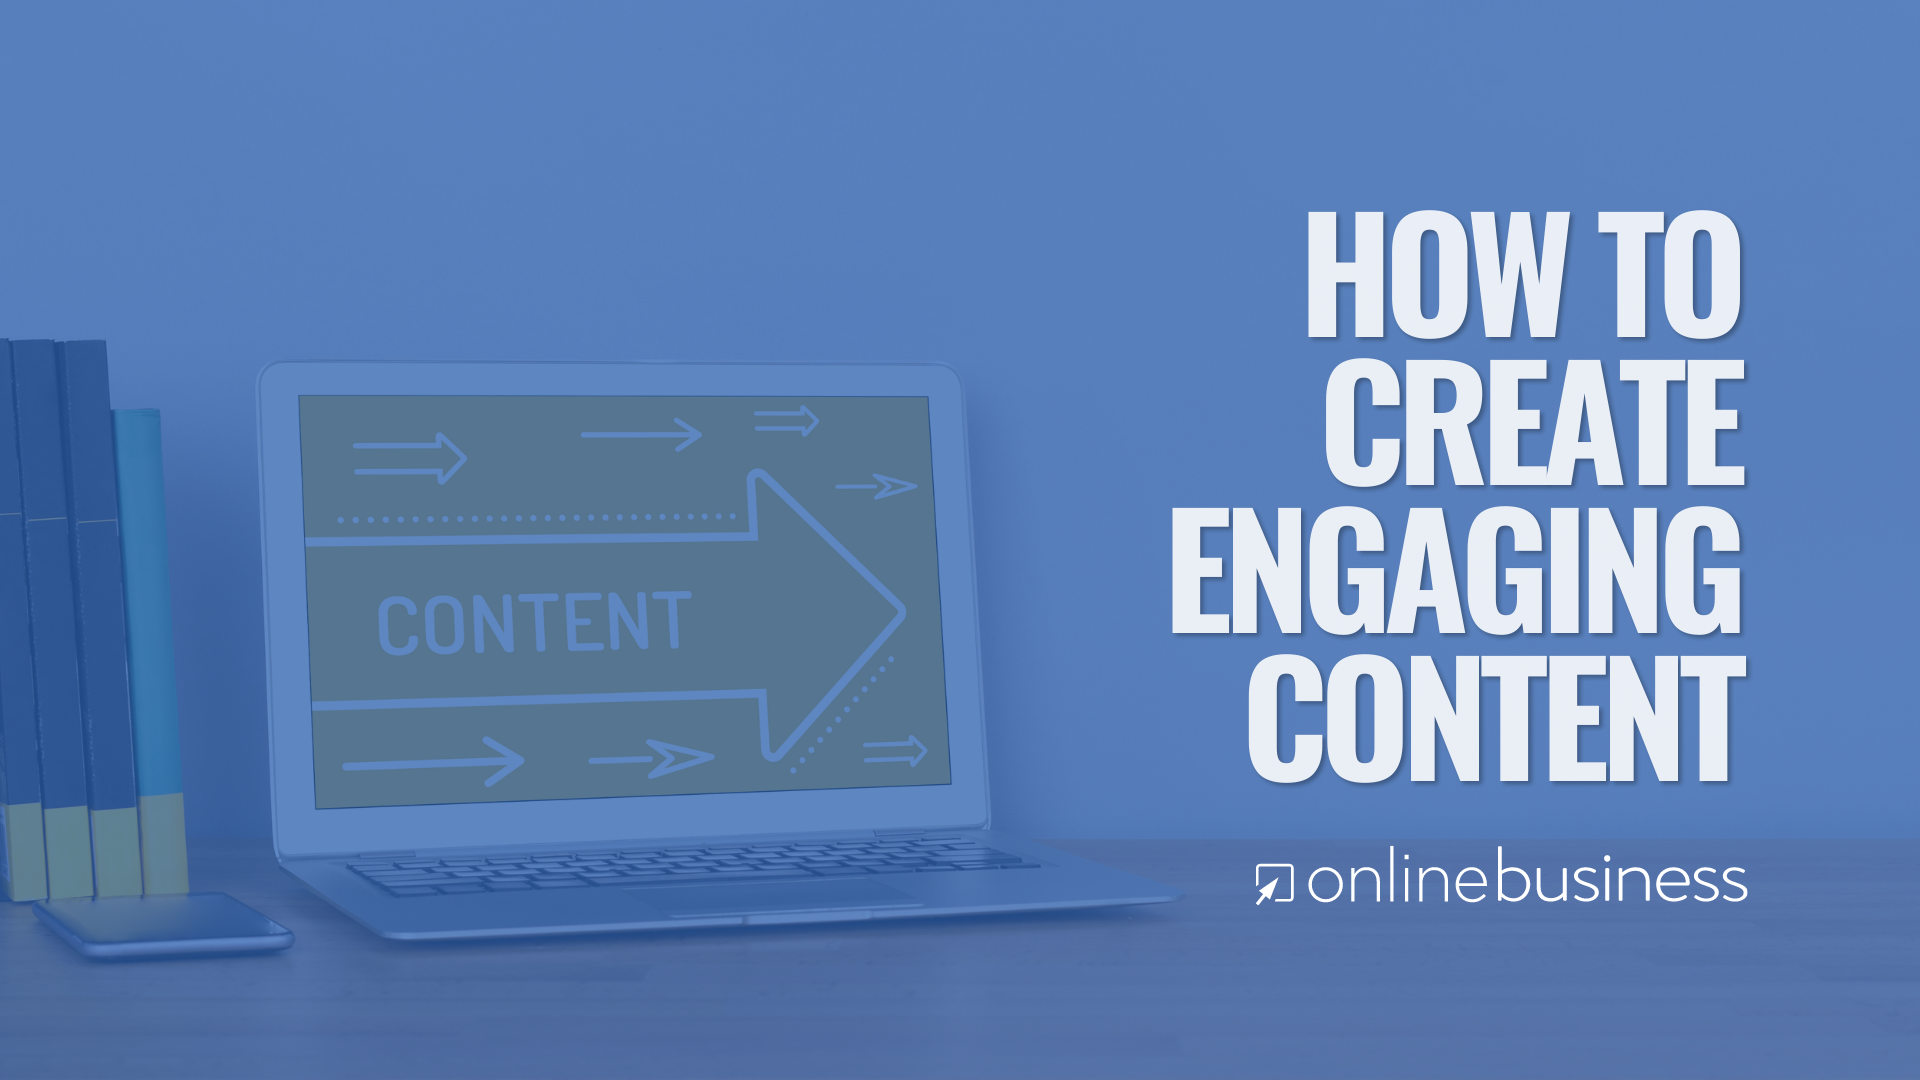 OnlineBusiness.com Discusses How to Create Engaging Blog Content